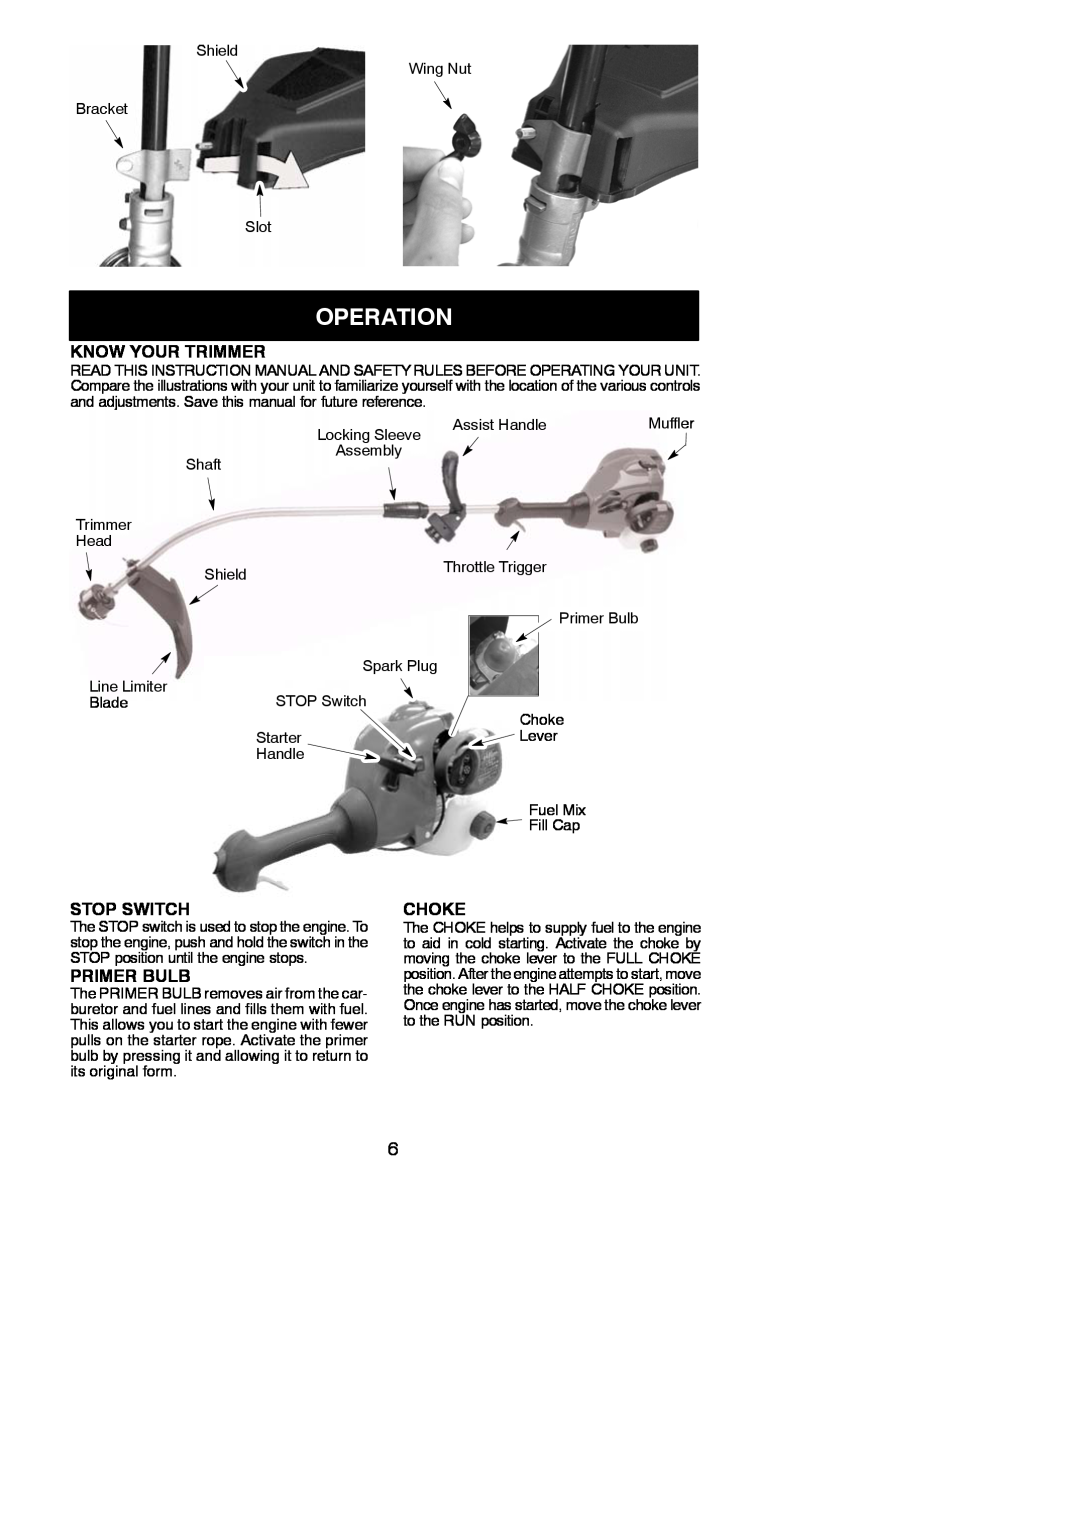 Weed Eater 545186796, FX26SC instruction manual Operation, Know Your Trimmer, Stop Switch, Primer Bulb, Choke 